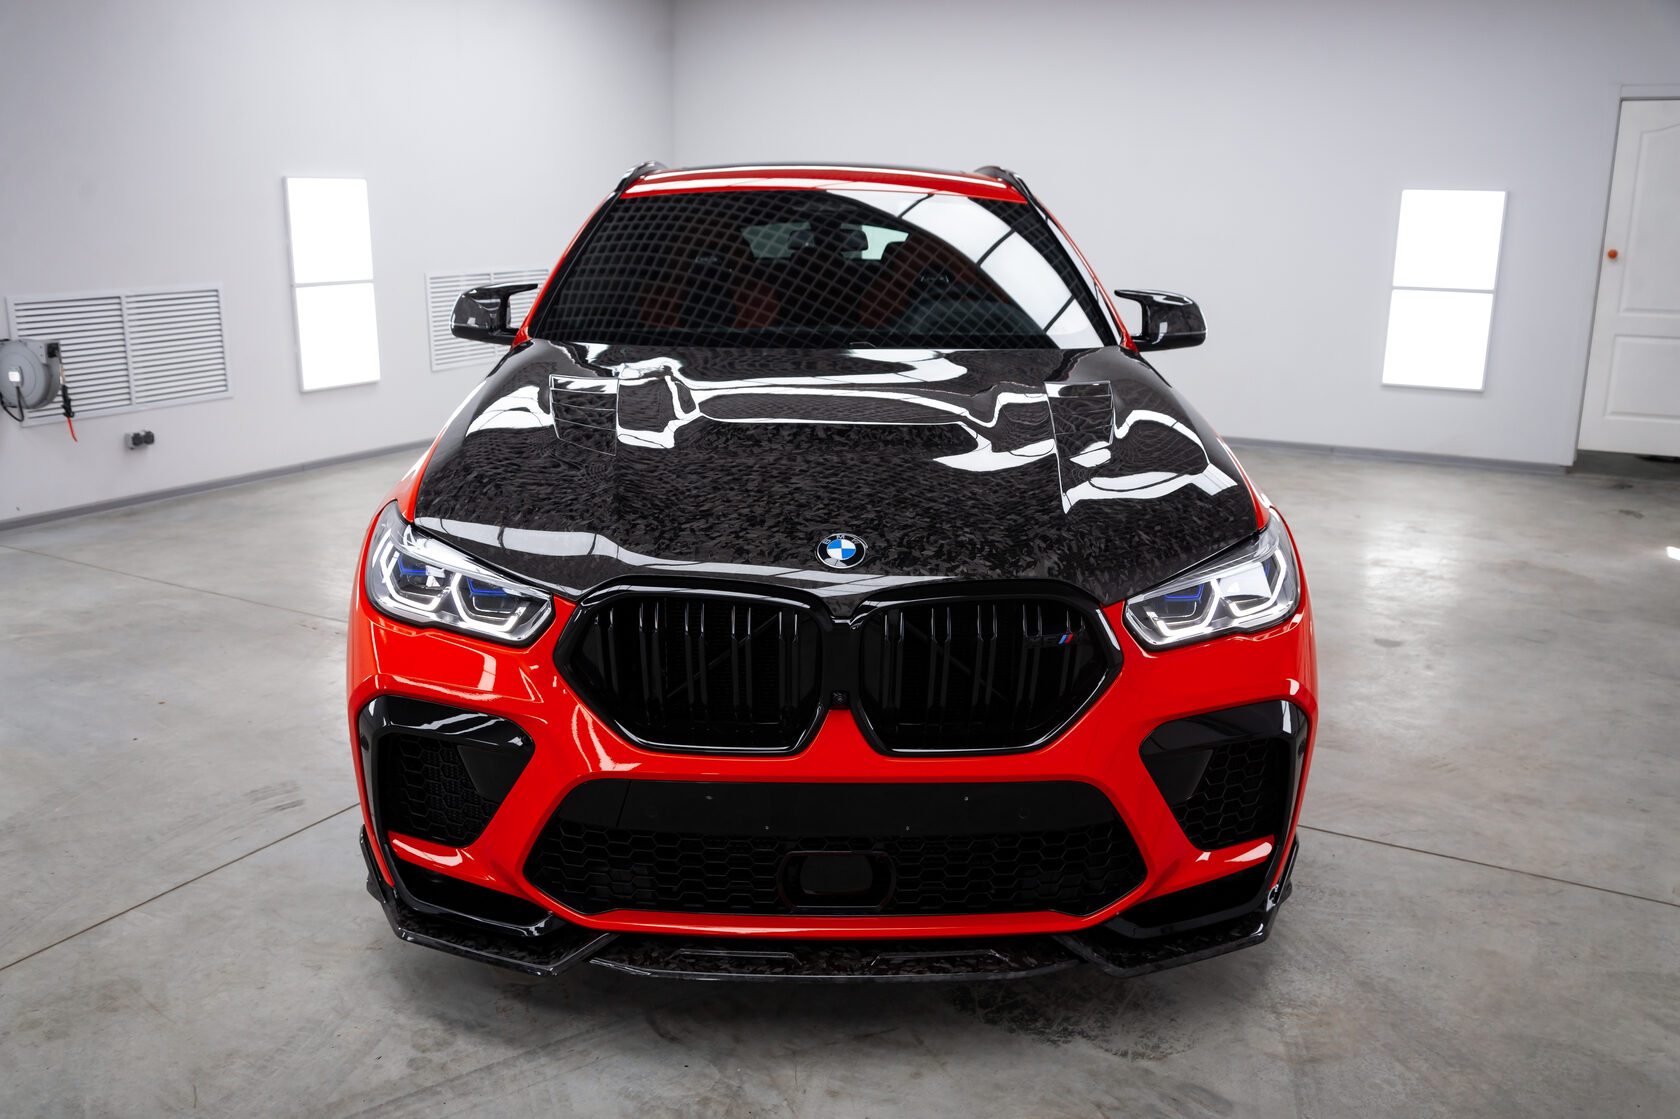 Check price and buy Forged Carbon Fiber Body kit set for BMW X6 M F96